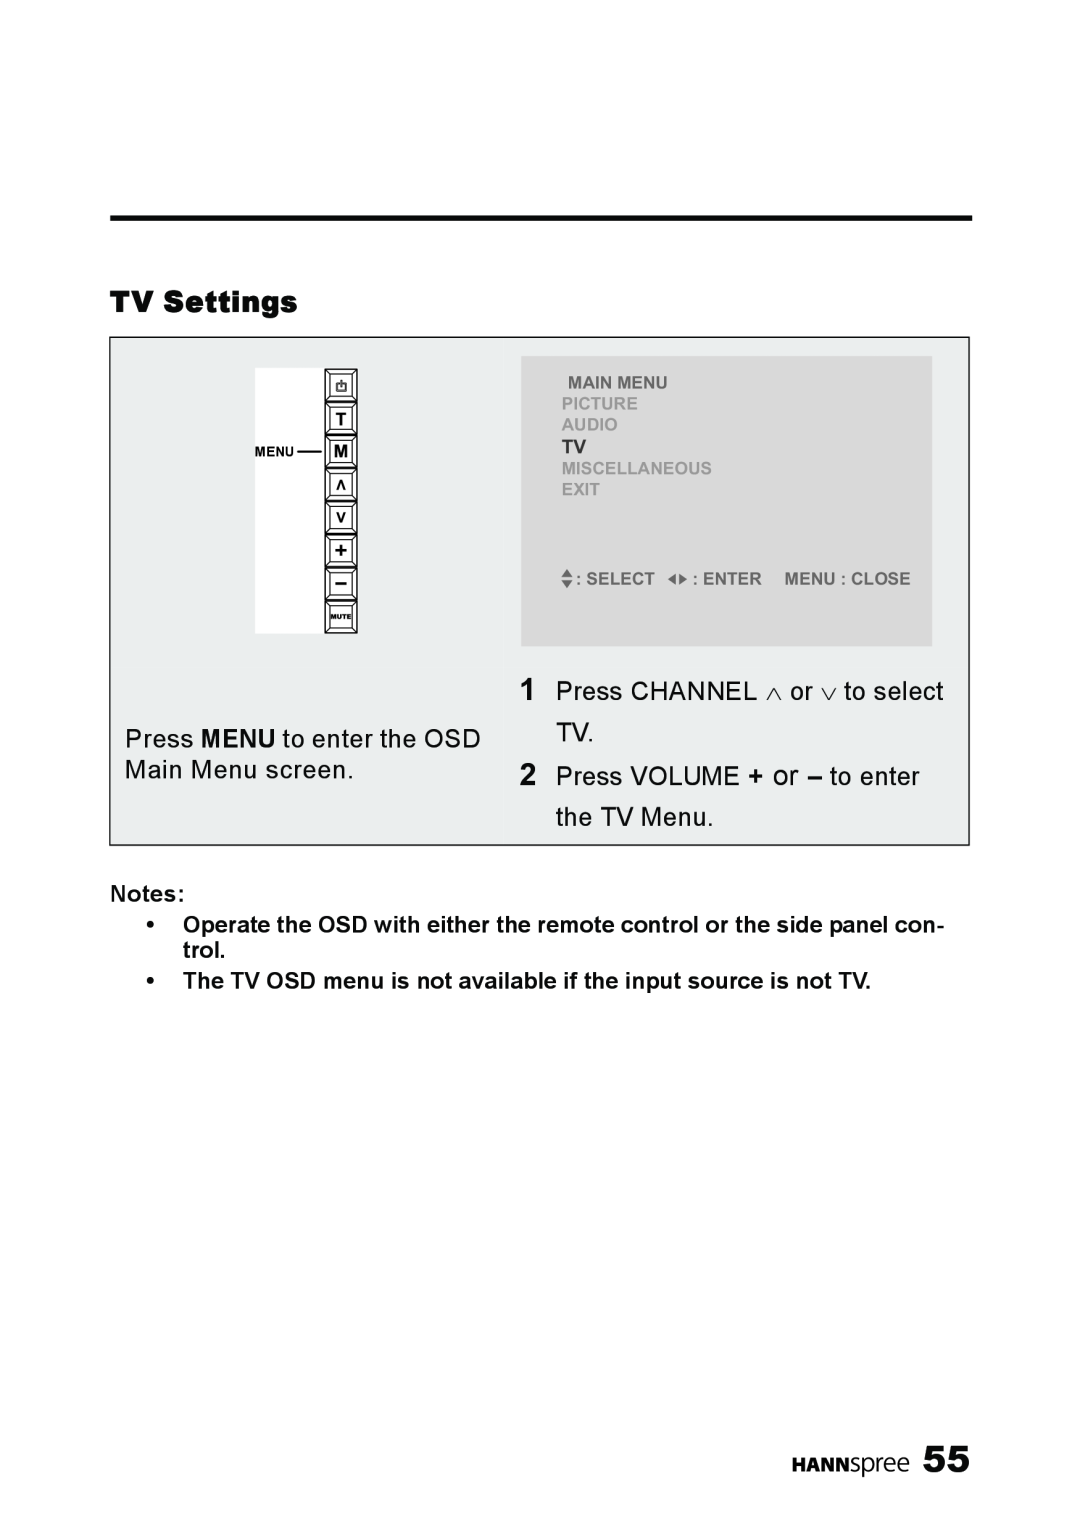 HANNspree LT11-23A1 TV Settings, The TV OSD menu is not available if the input source is not TV, Main Menu, Picture Audio 